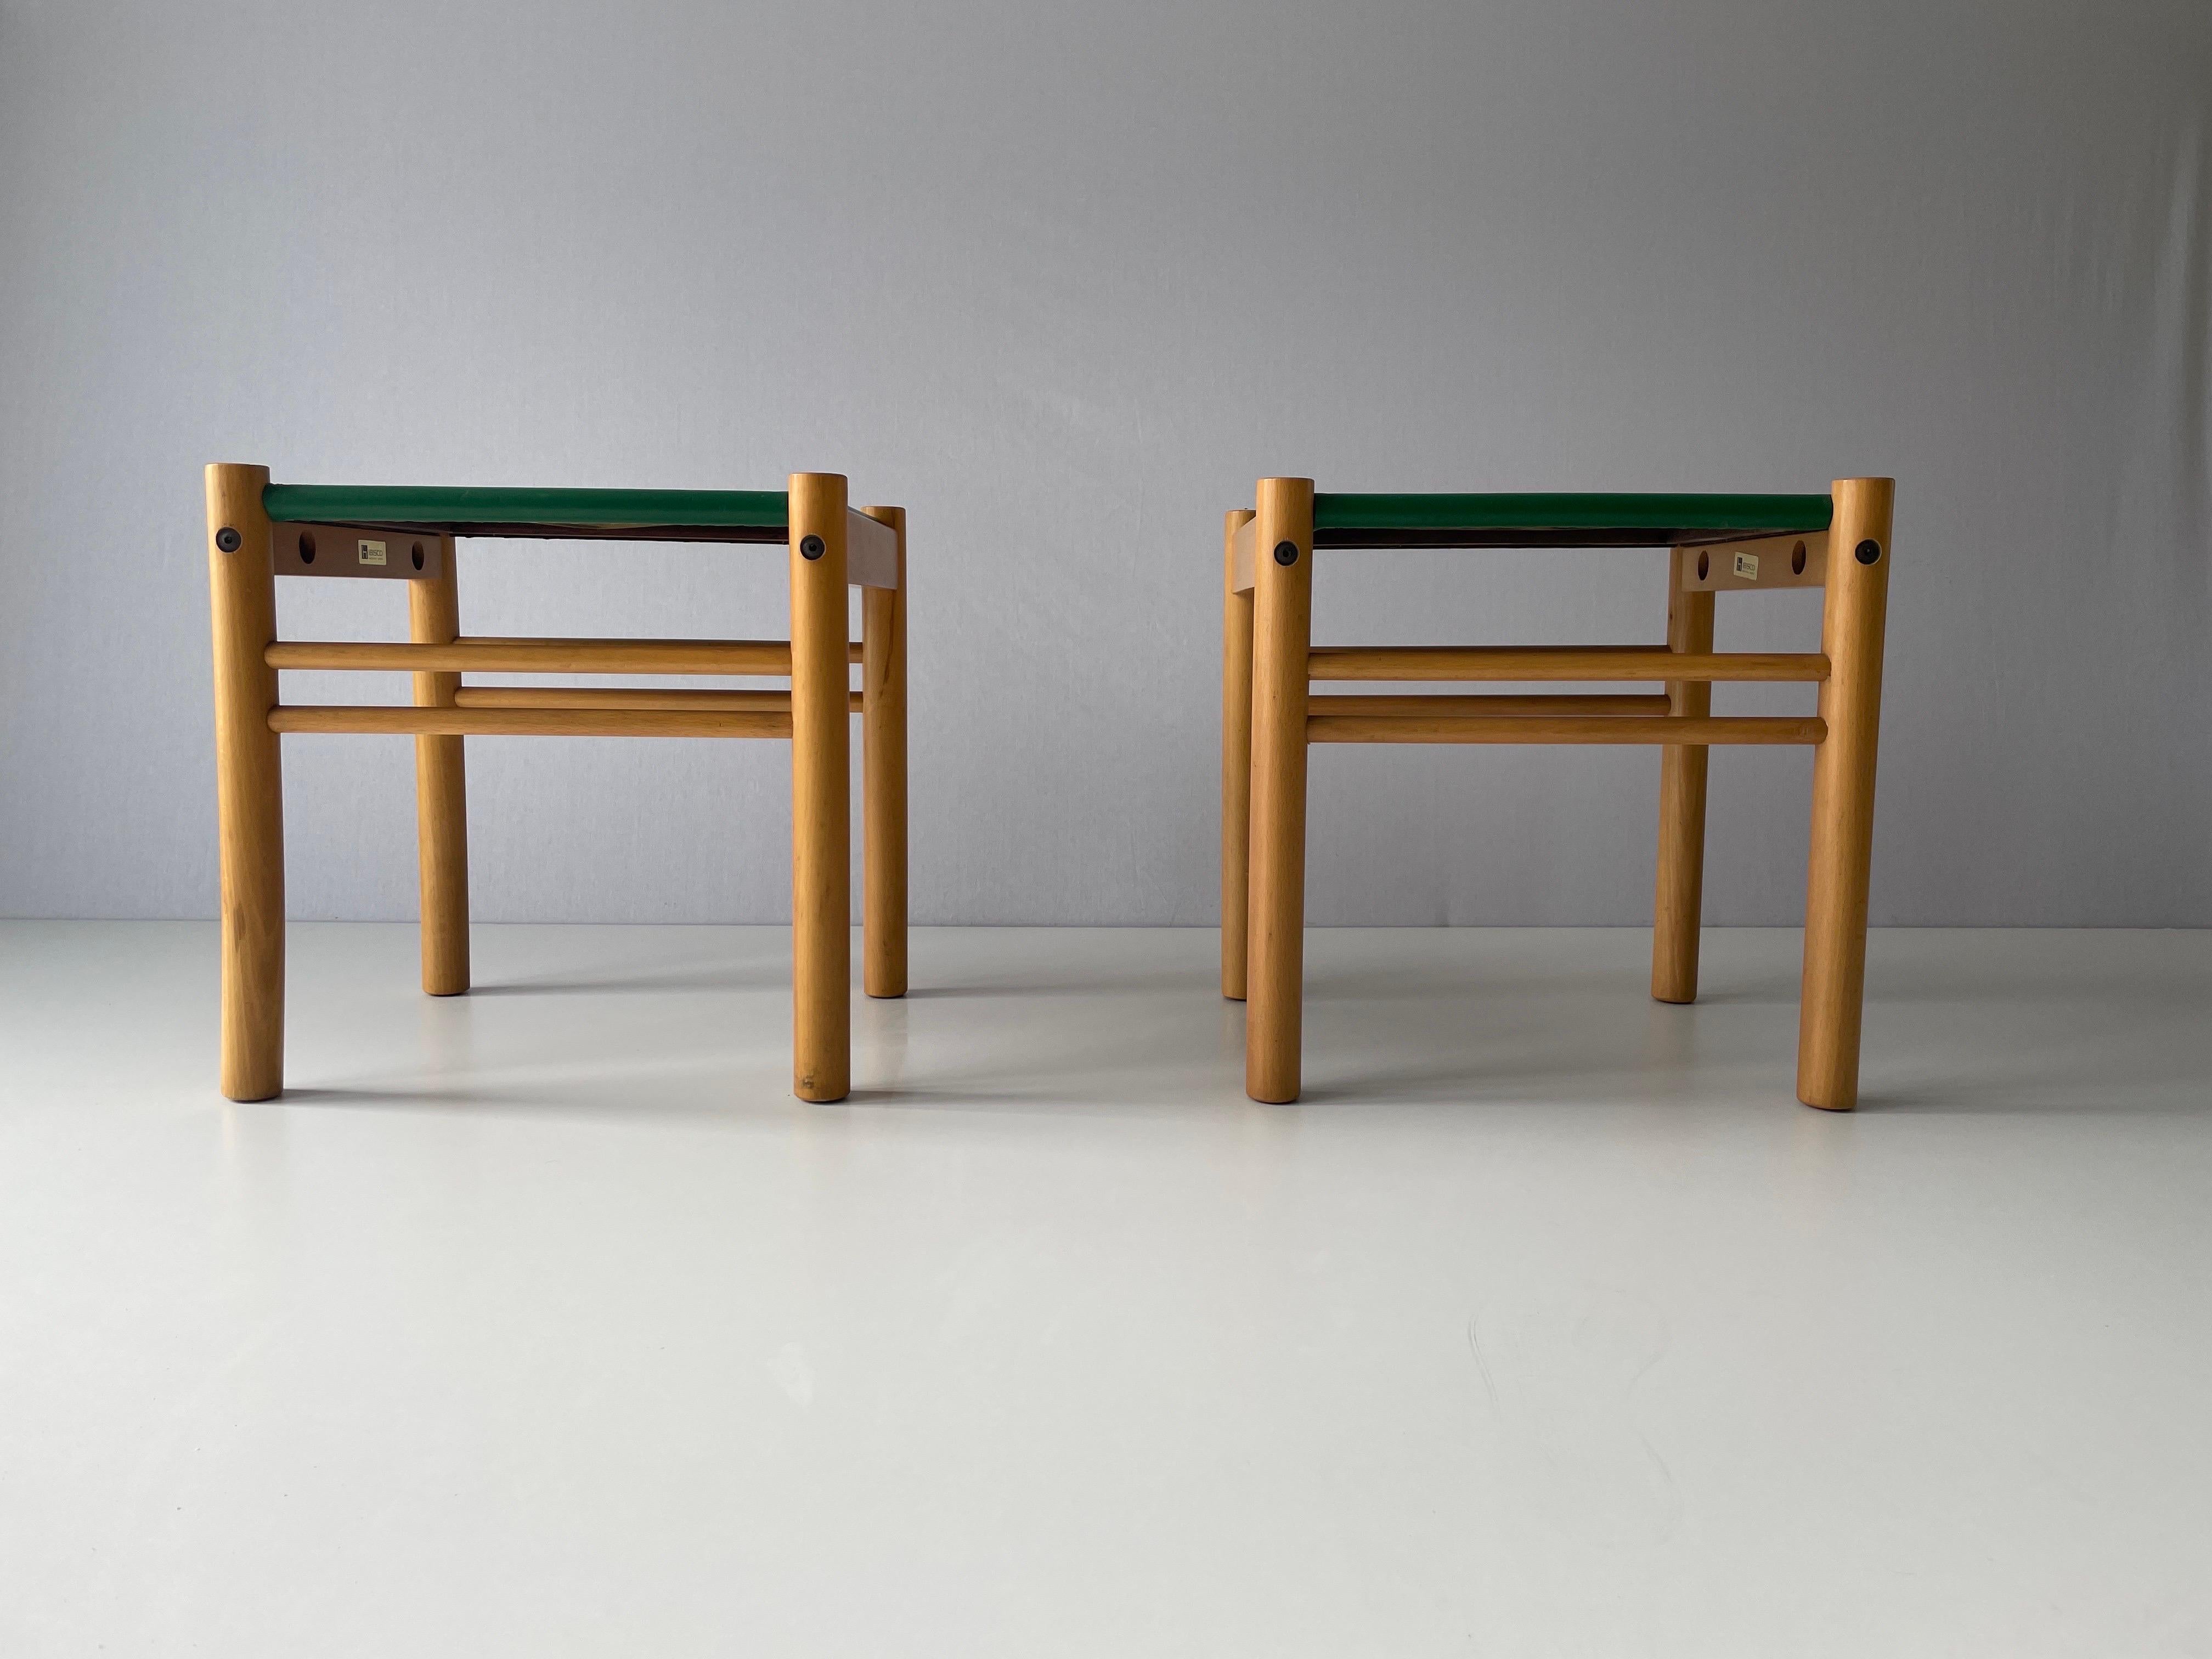 Space Age Green Leather and Birch Wood Pair of Stools by IBISCO, 1970s, Italy For Sale